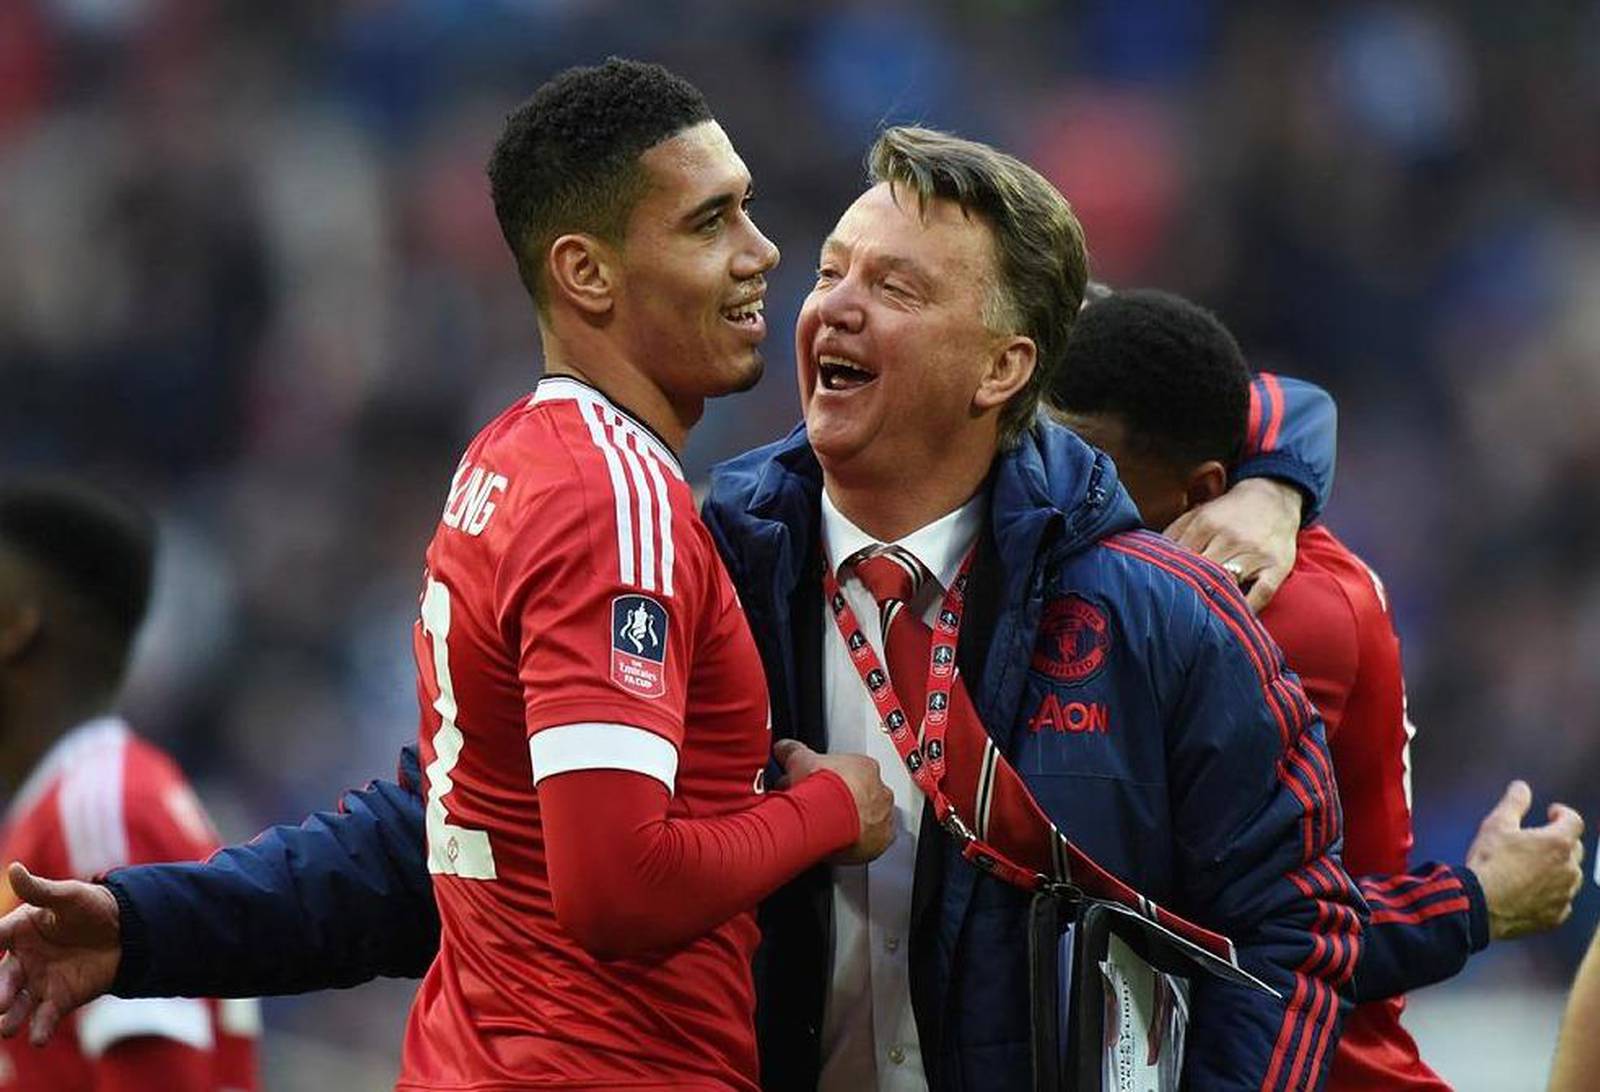 Would winning the FA Cup represent success for Louis van Gaal? ‘It is